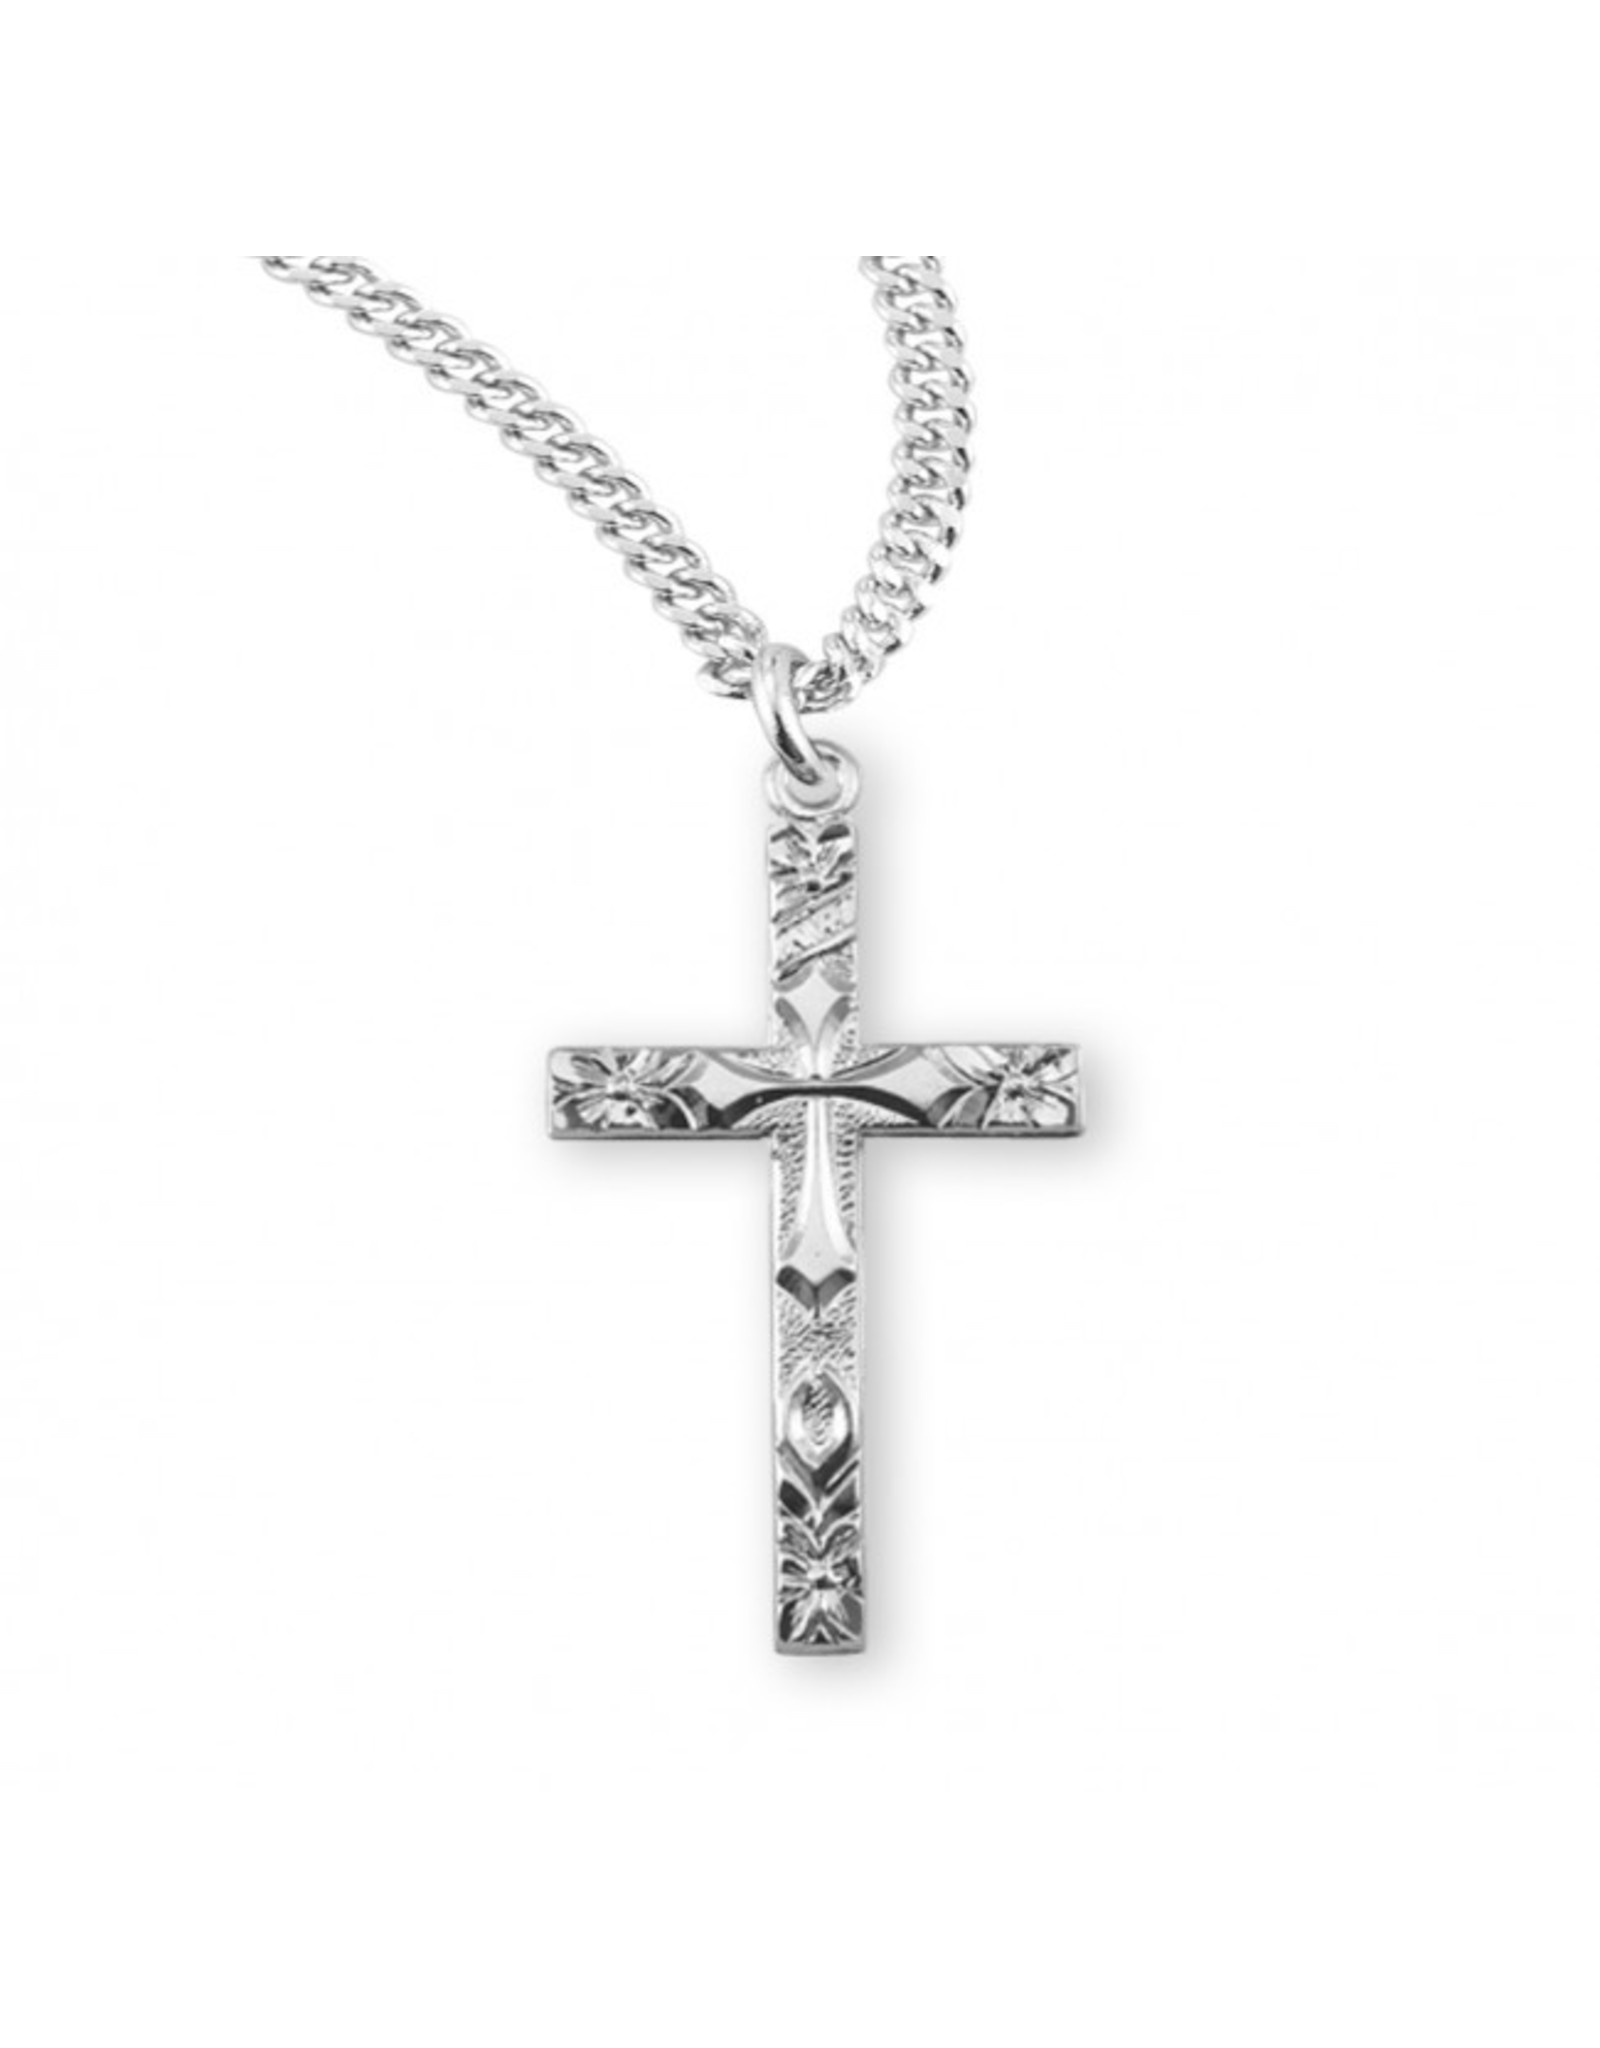 HMH Cross Medal, Flower Tipped, Sterling Silver, 18" Chain